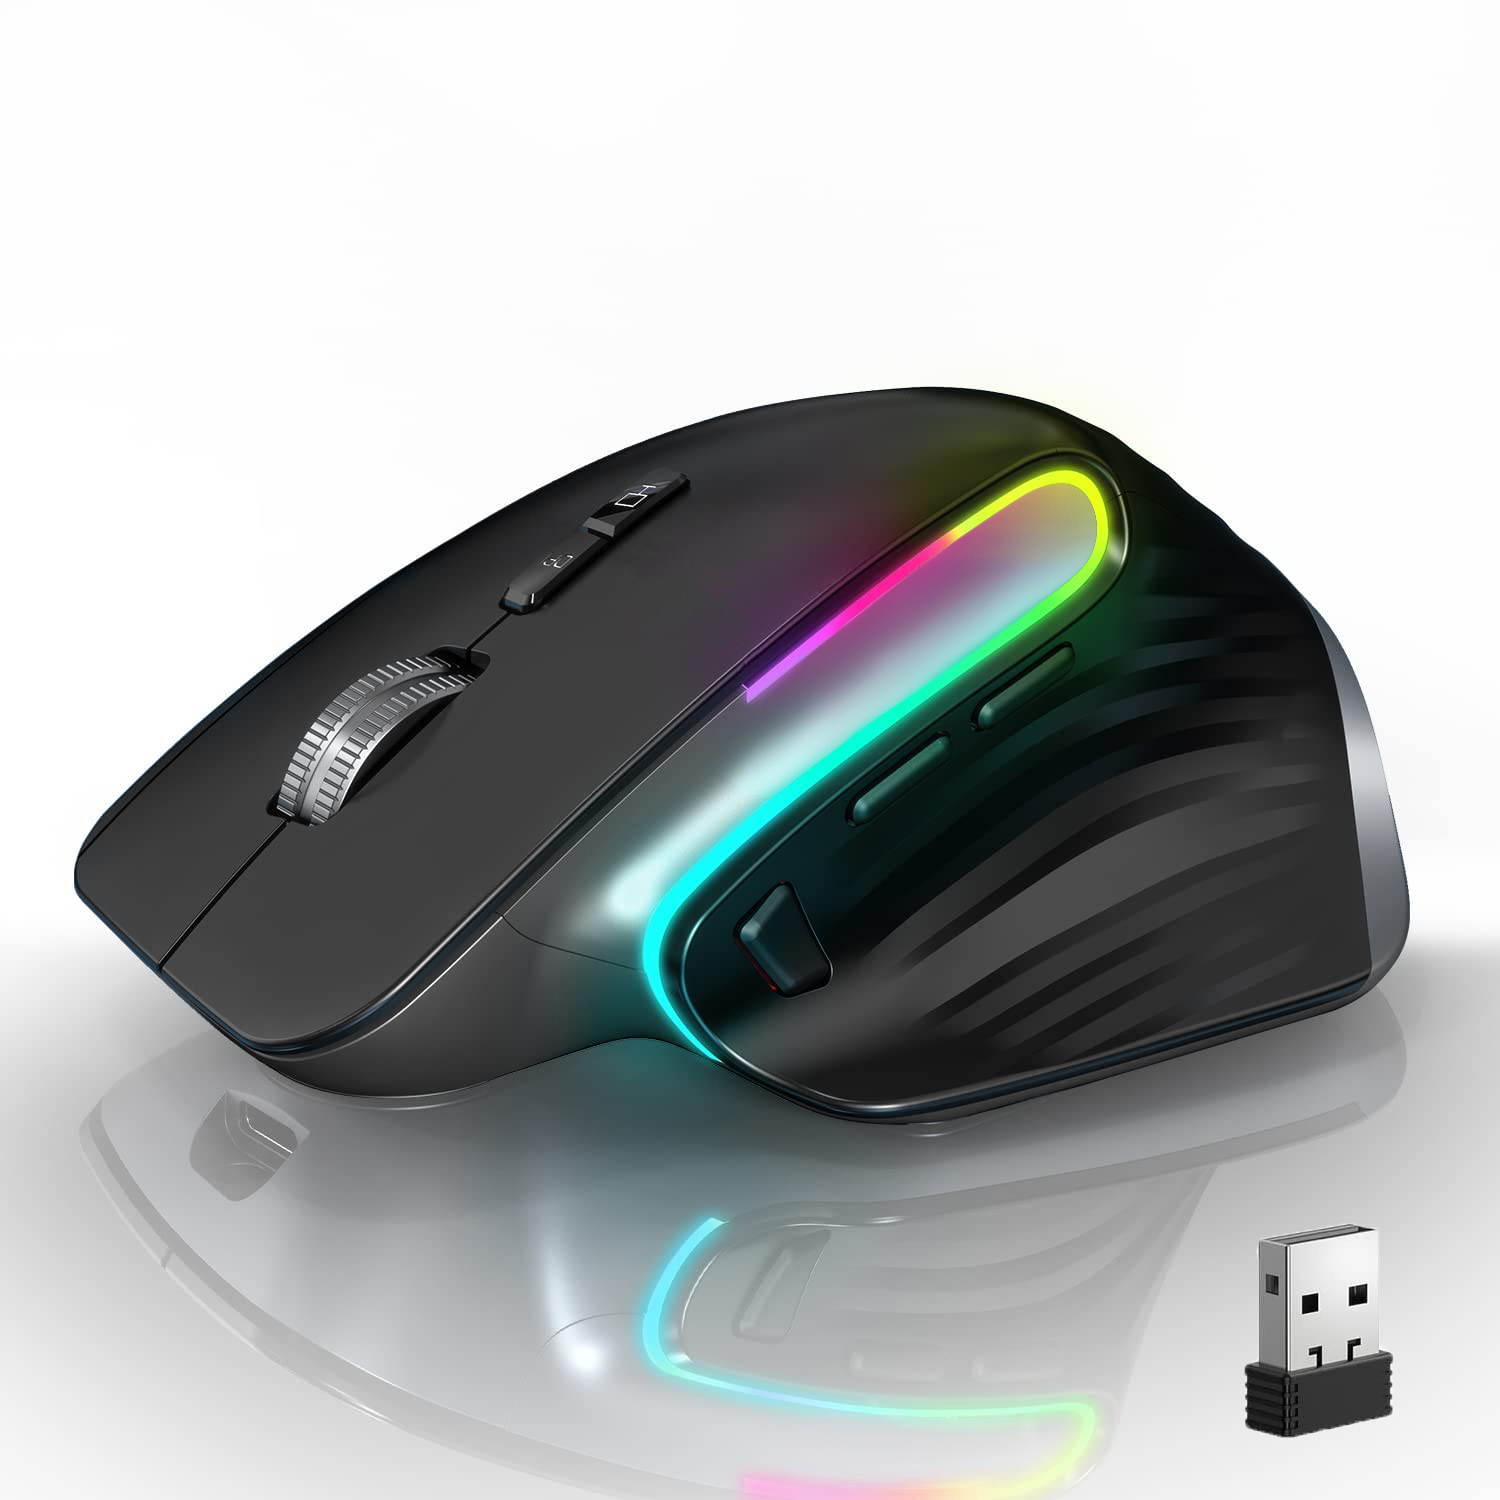 M10 2.4G LED Wireless Mouse,Ergonomic Optical Mouse Muted,Rechargeable 4000 DPI for Laptop,9 Buttons